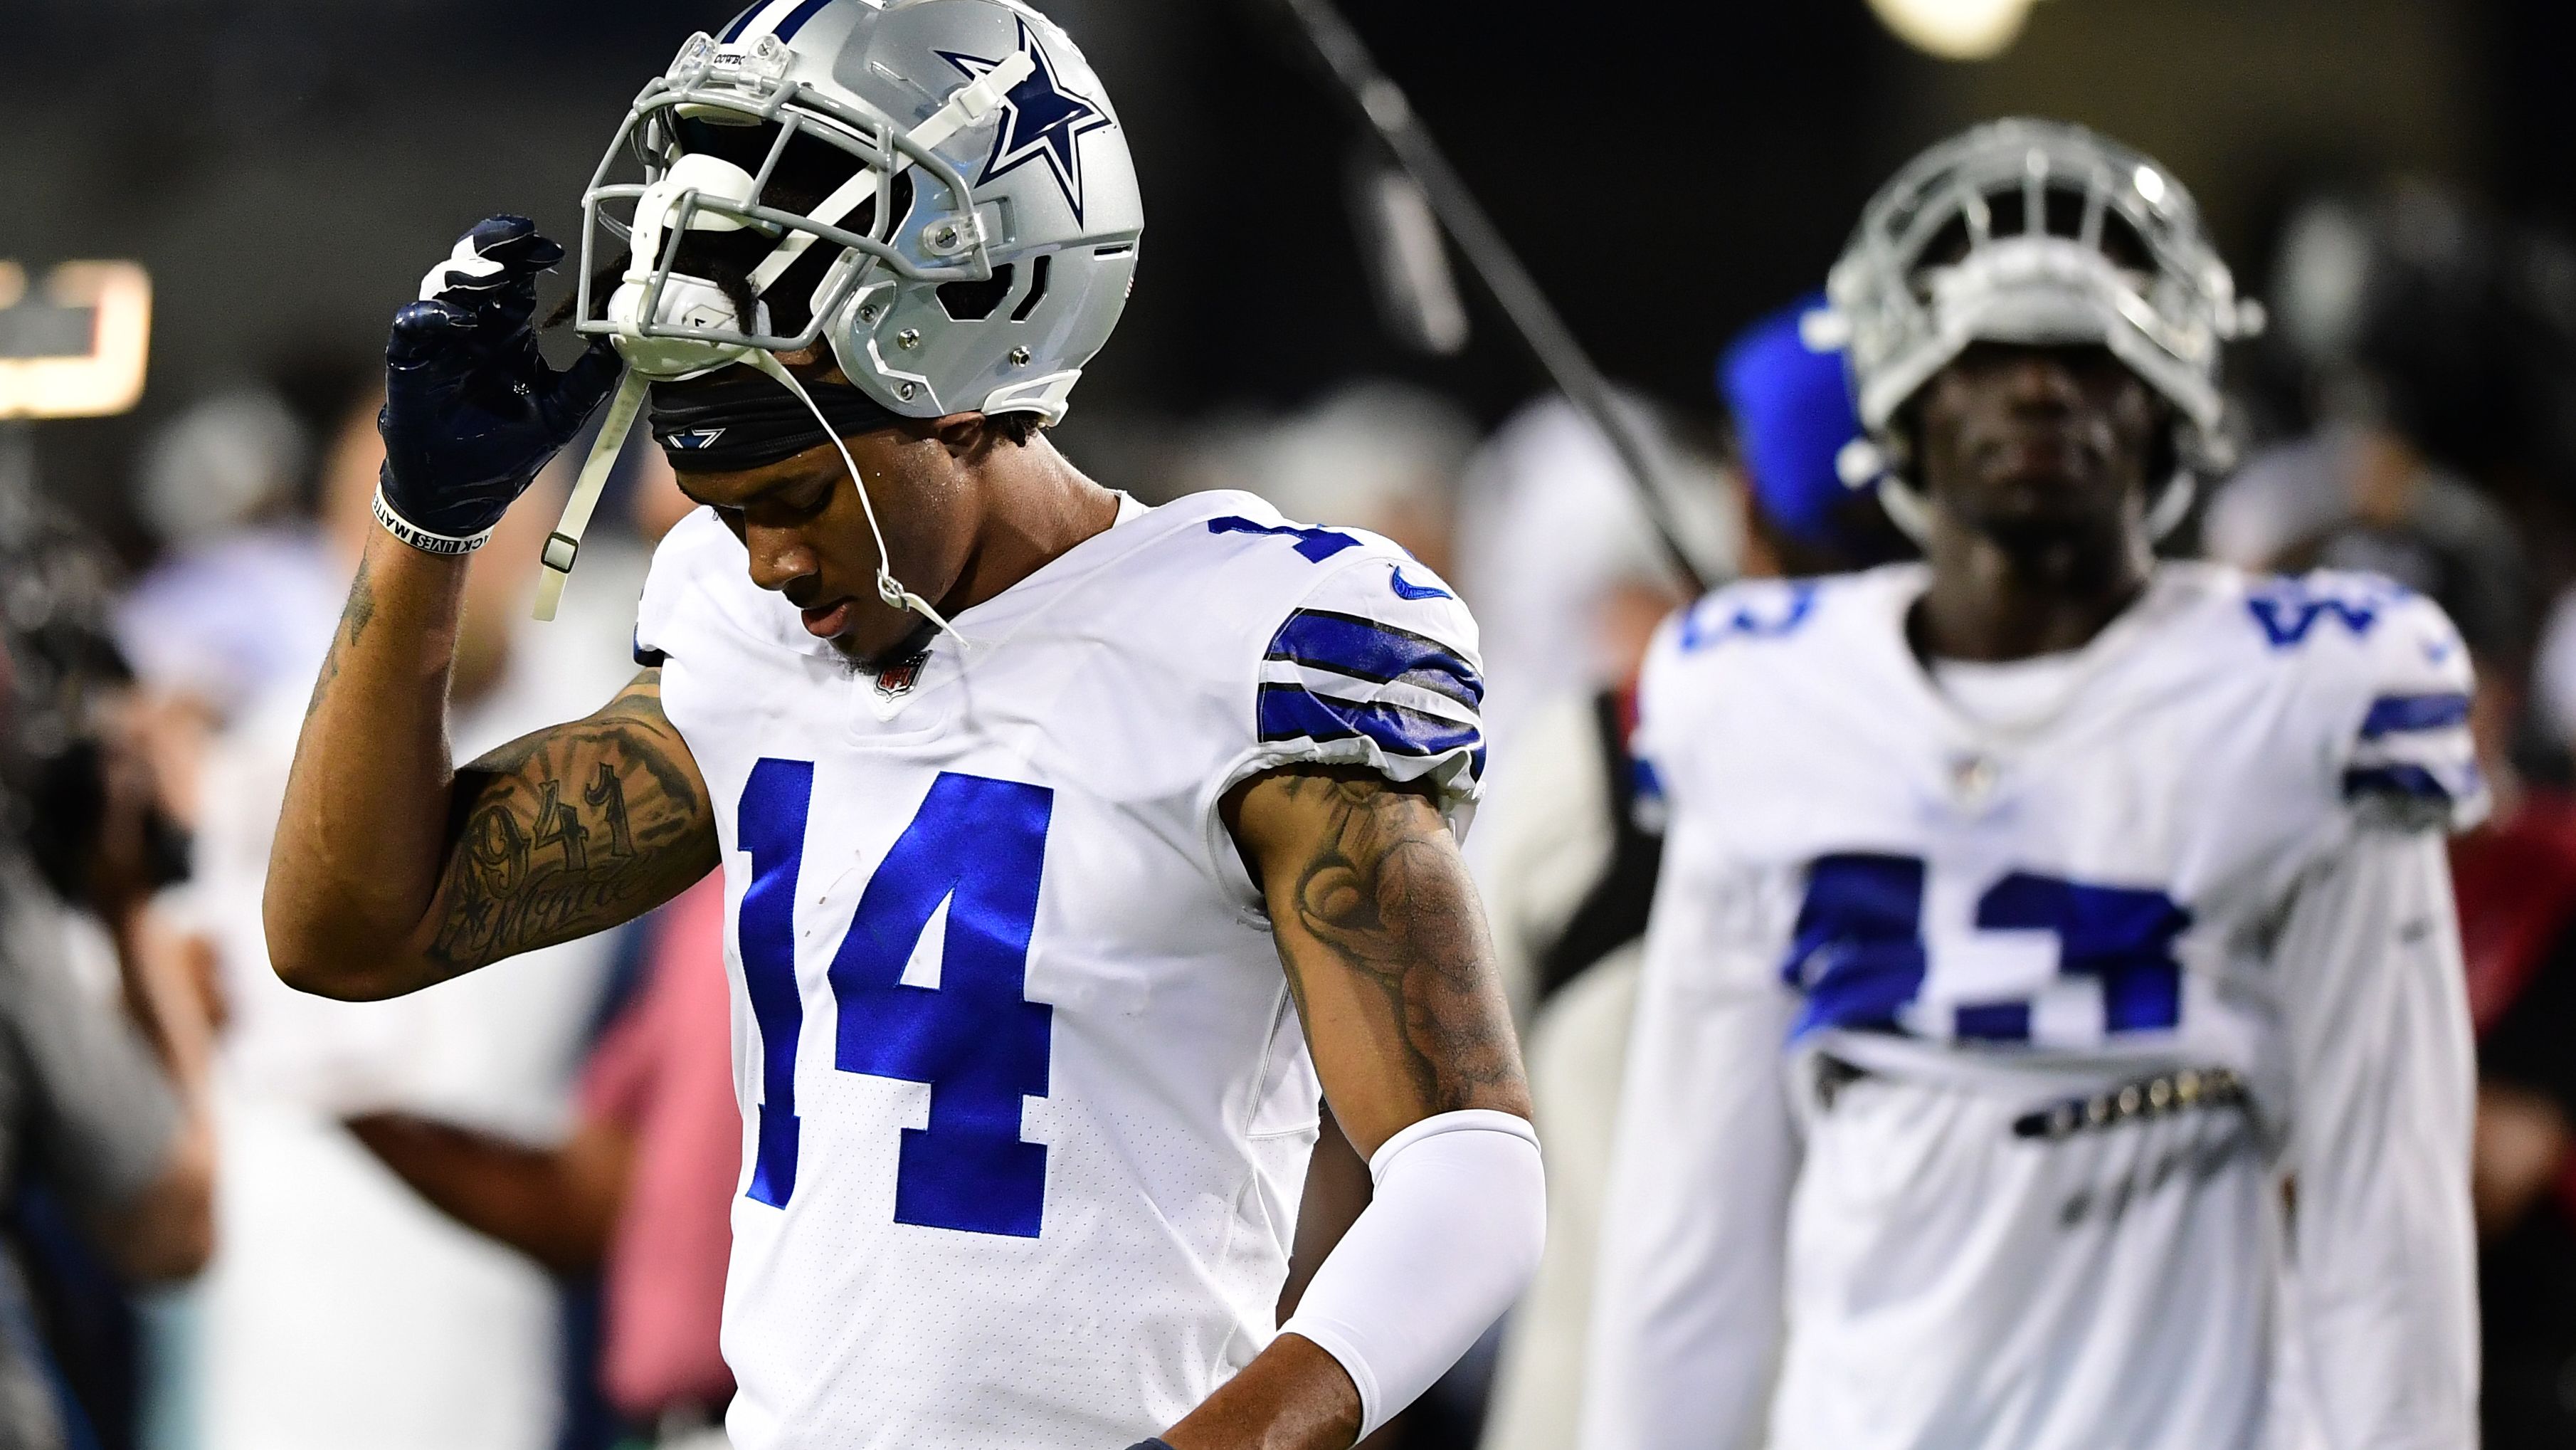 The Cowboys are both one of the most loved and most disliked teams in the NFL.